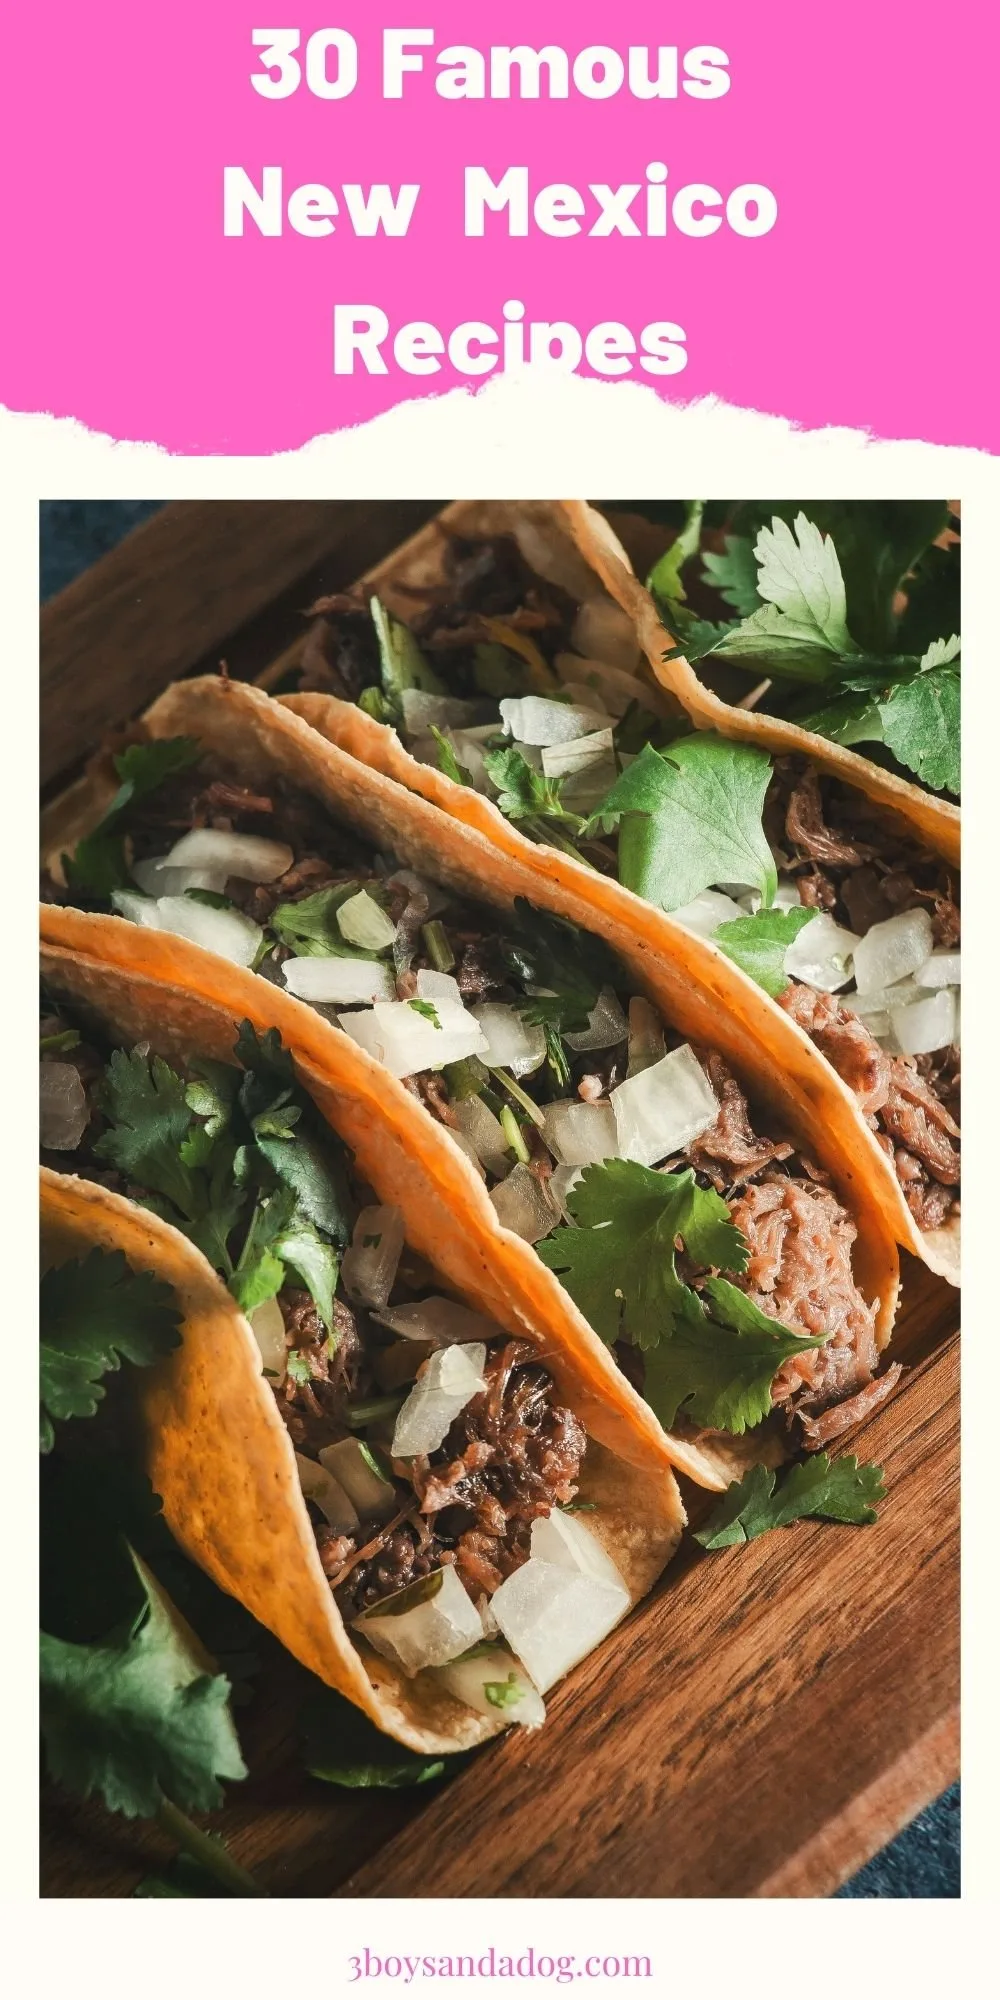 extra pin with image of tacos for famous New Mexico recipes